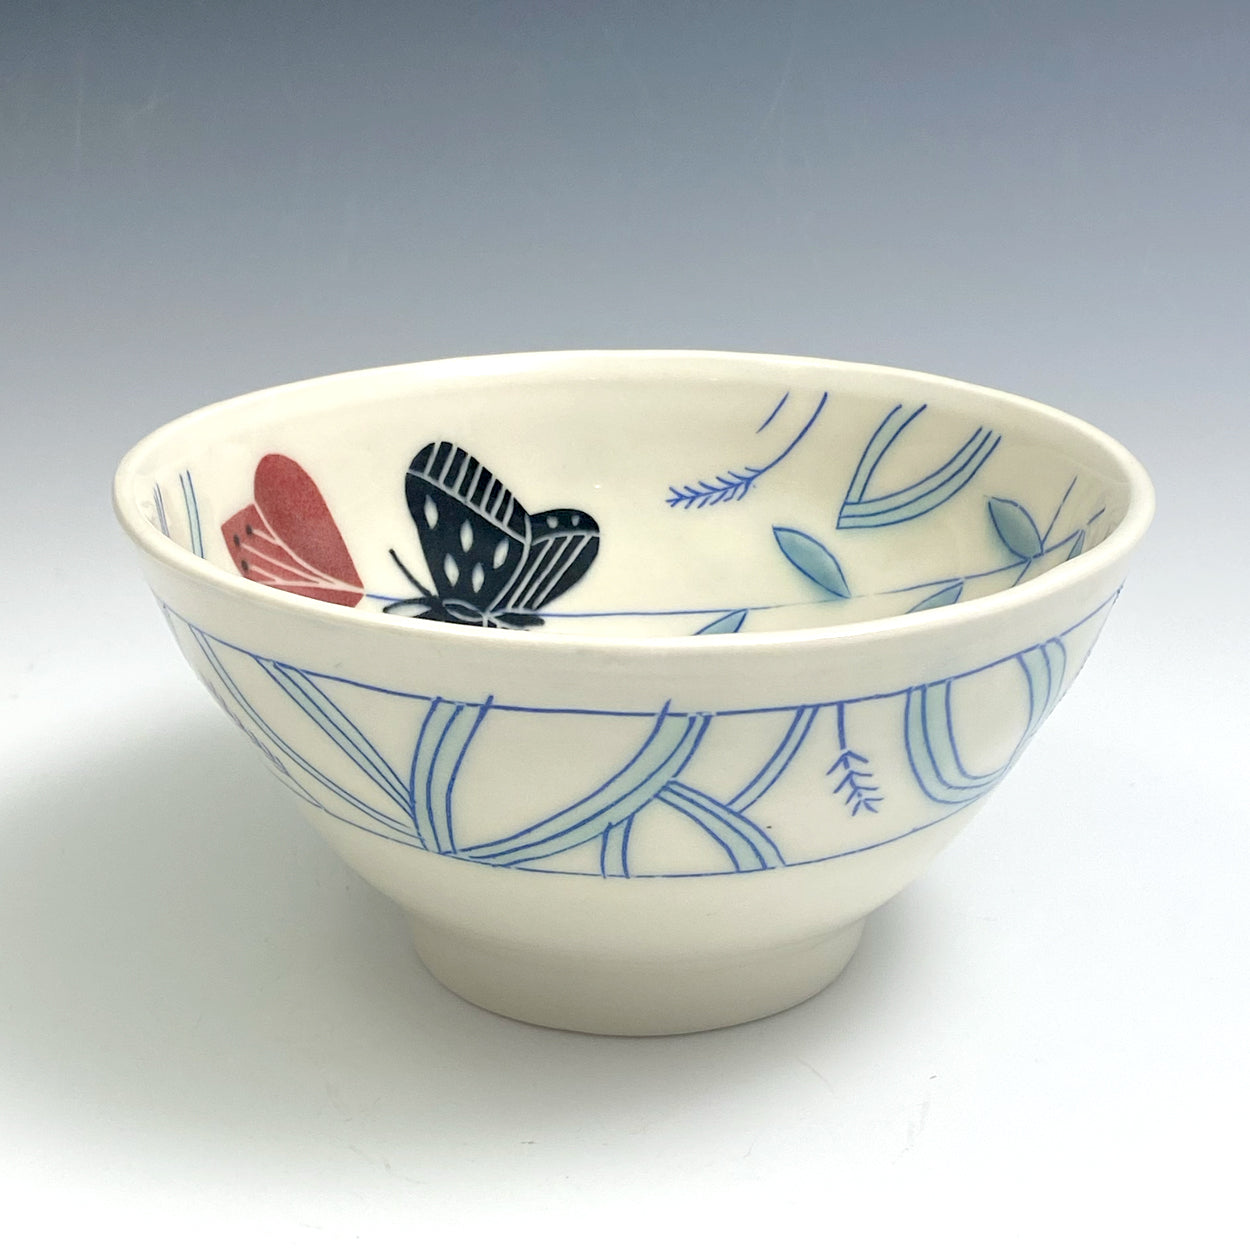 Cereal bowl with black butterfly  03